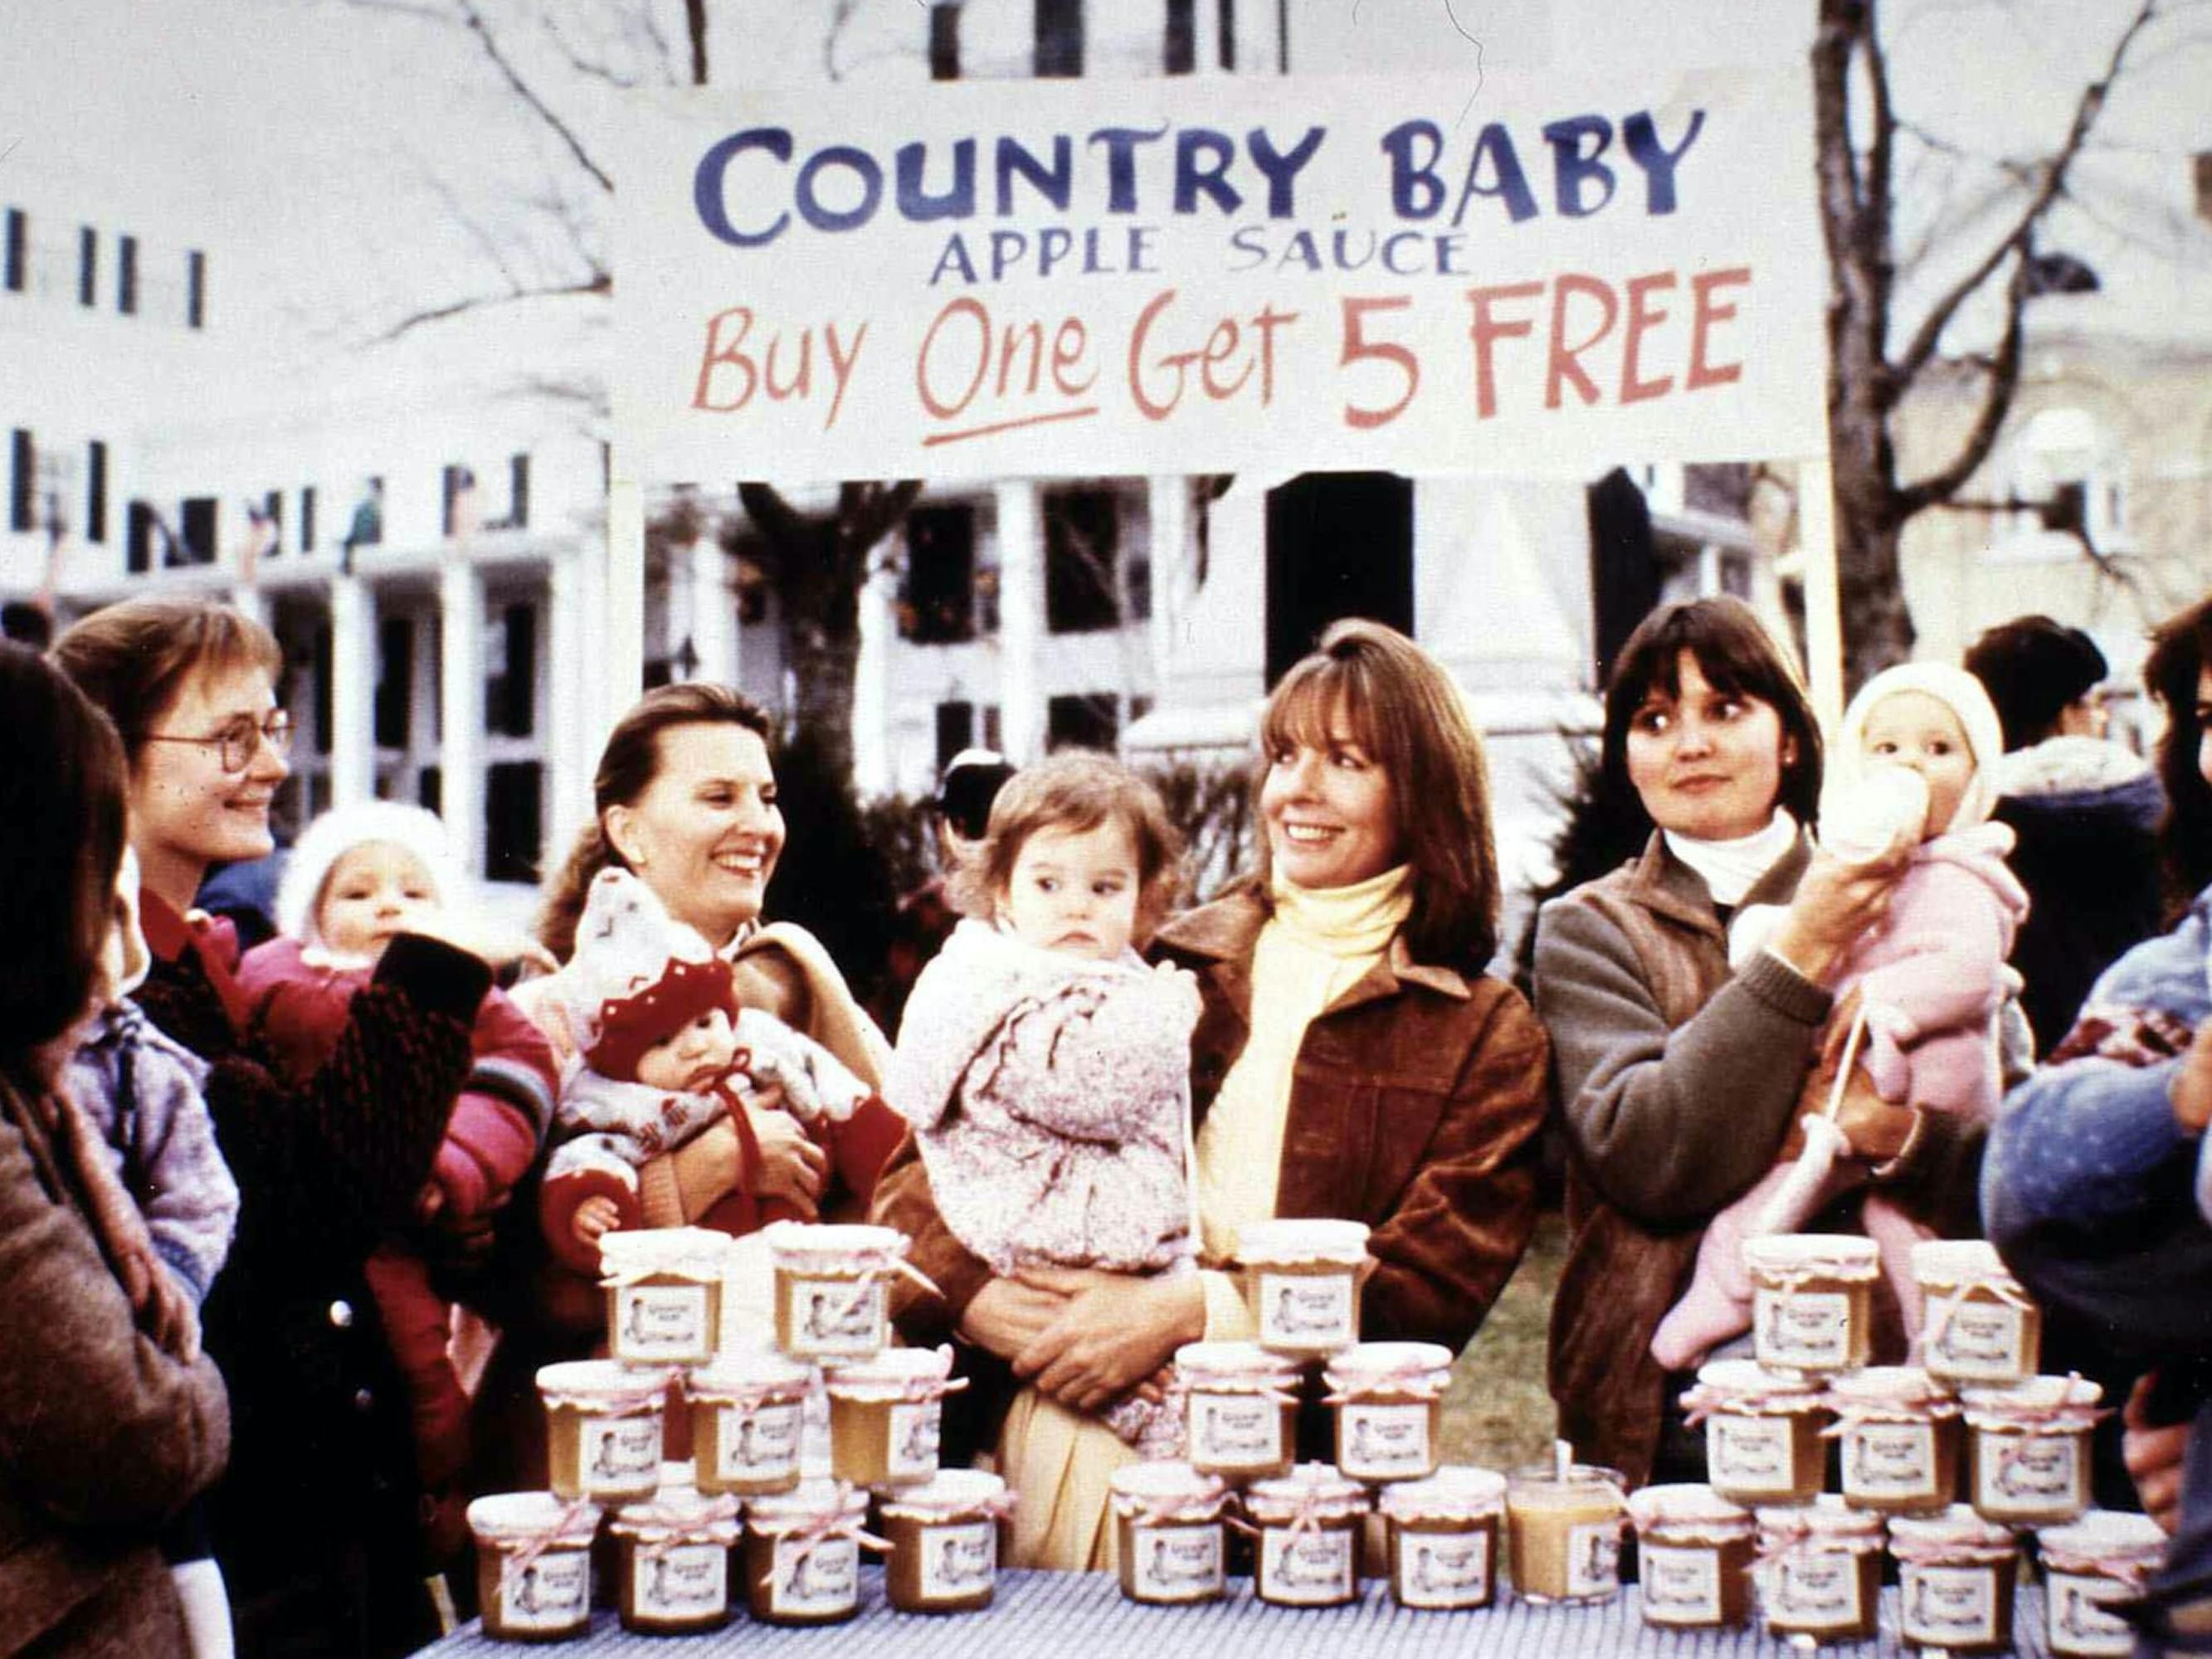 J.C. Wiatt (Diane Keaton) and the cast of Baby Boom. She holds her baby behind a table with piles of applesauce. In the background is a banner that reads: Country Baby Apple Sauce Buy One Get 5 Free.